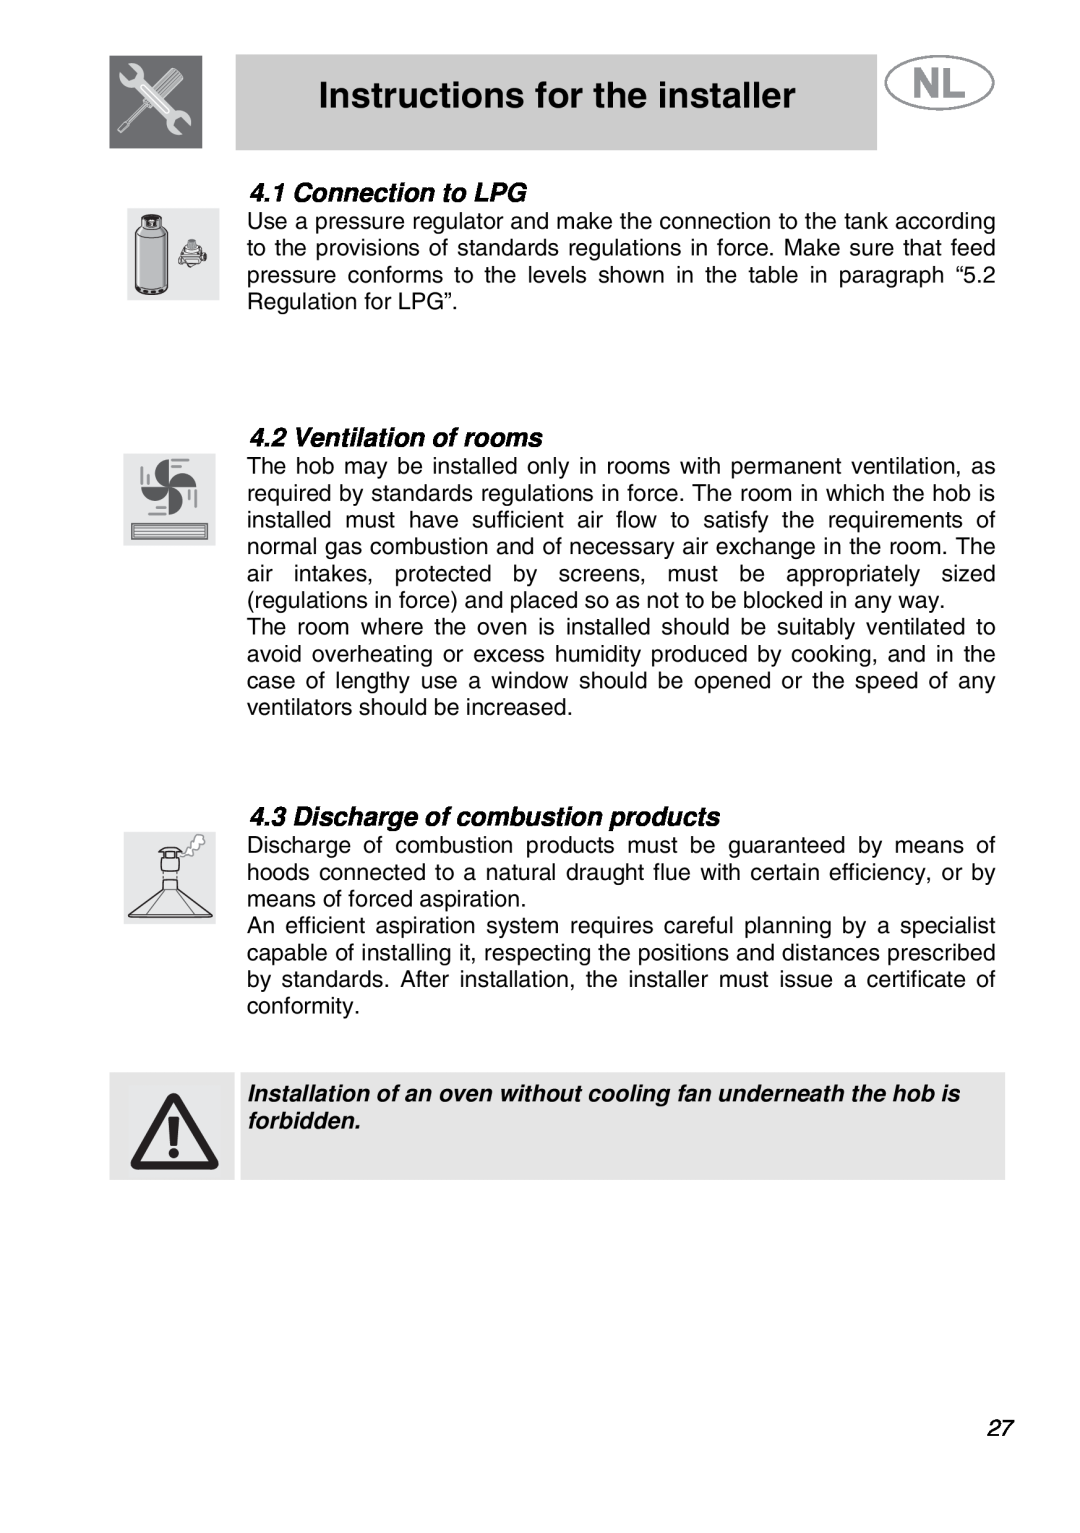 Smeg GKCO955 Connection to LPG, Ventilation of rooms, Discharge of combustion products, Instructions for the installer 